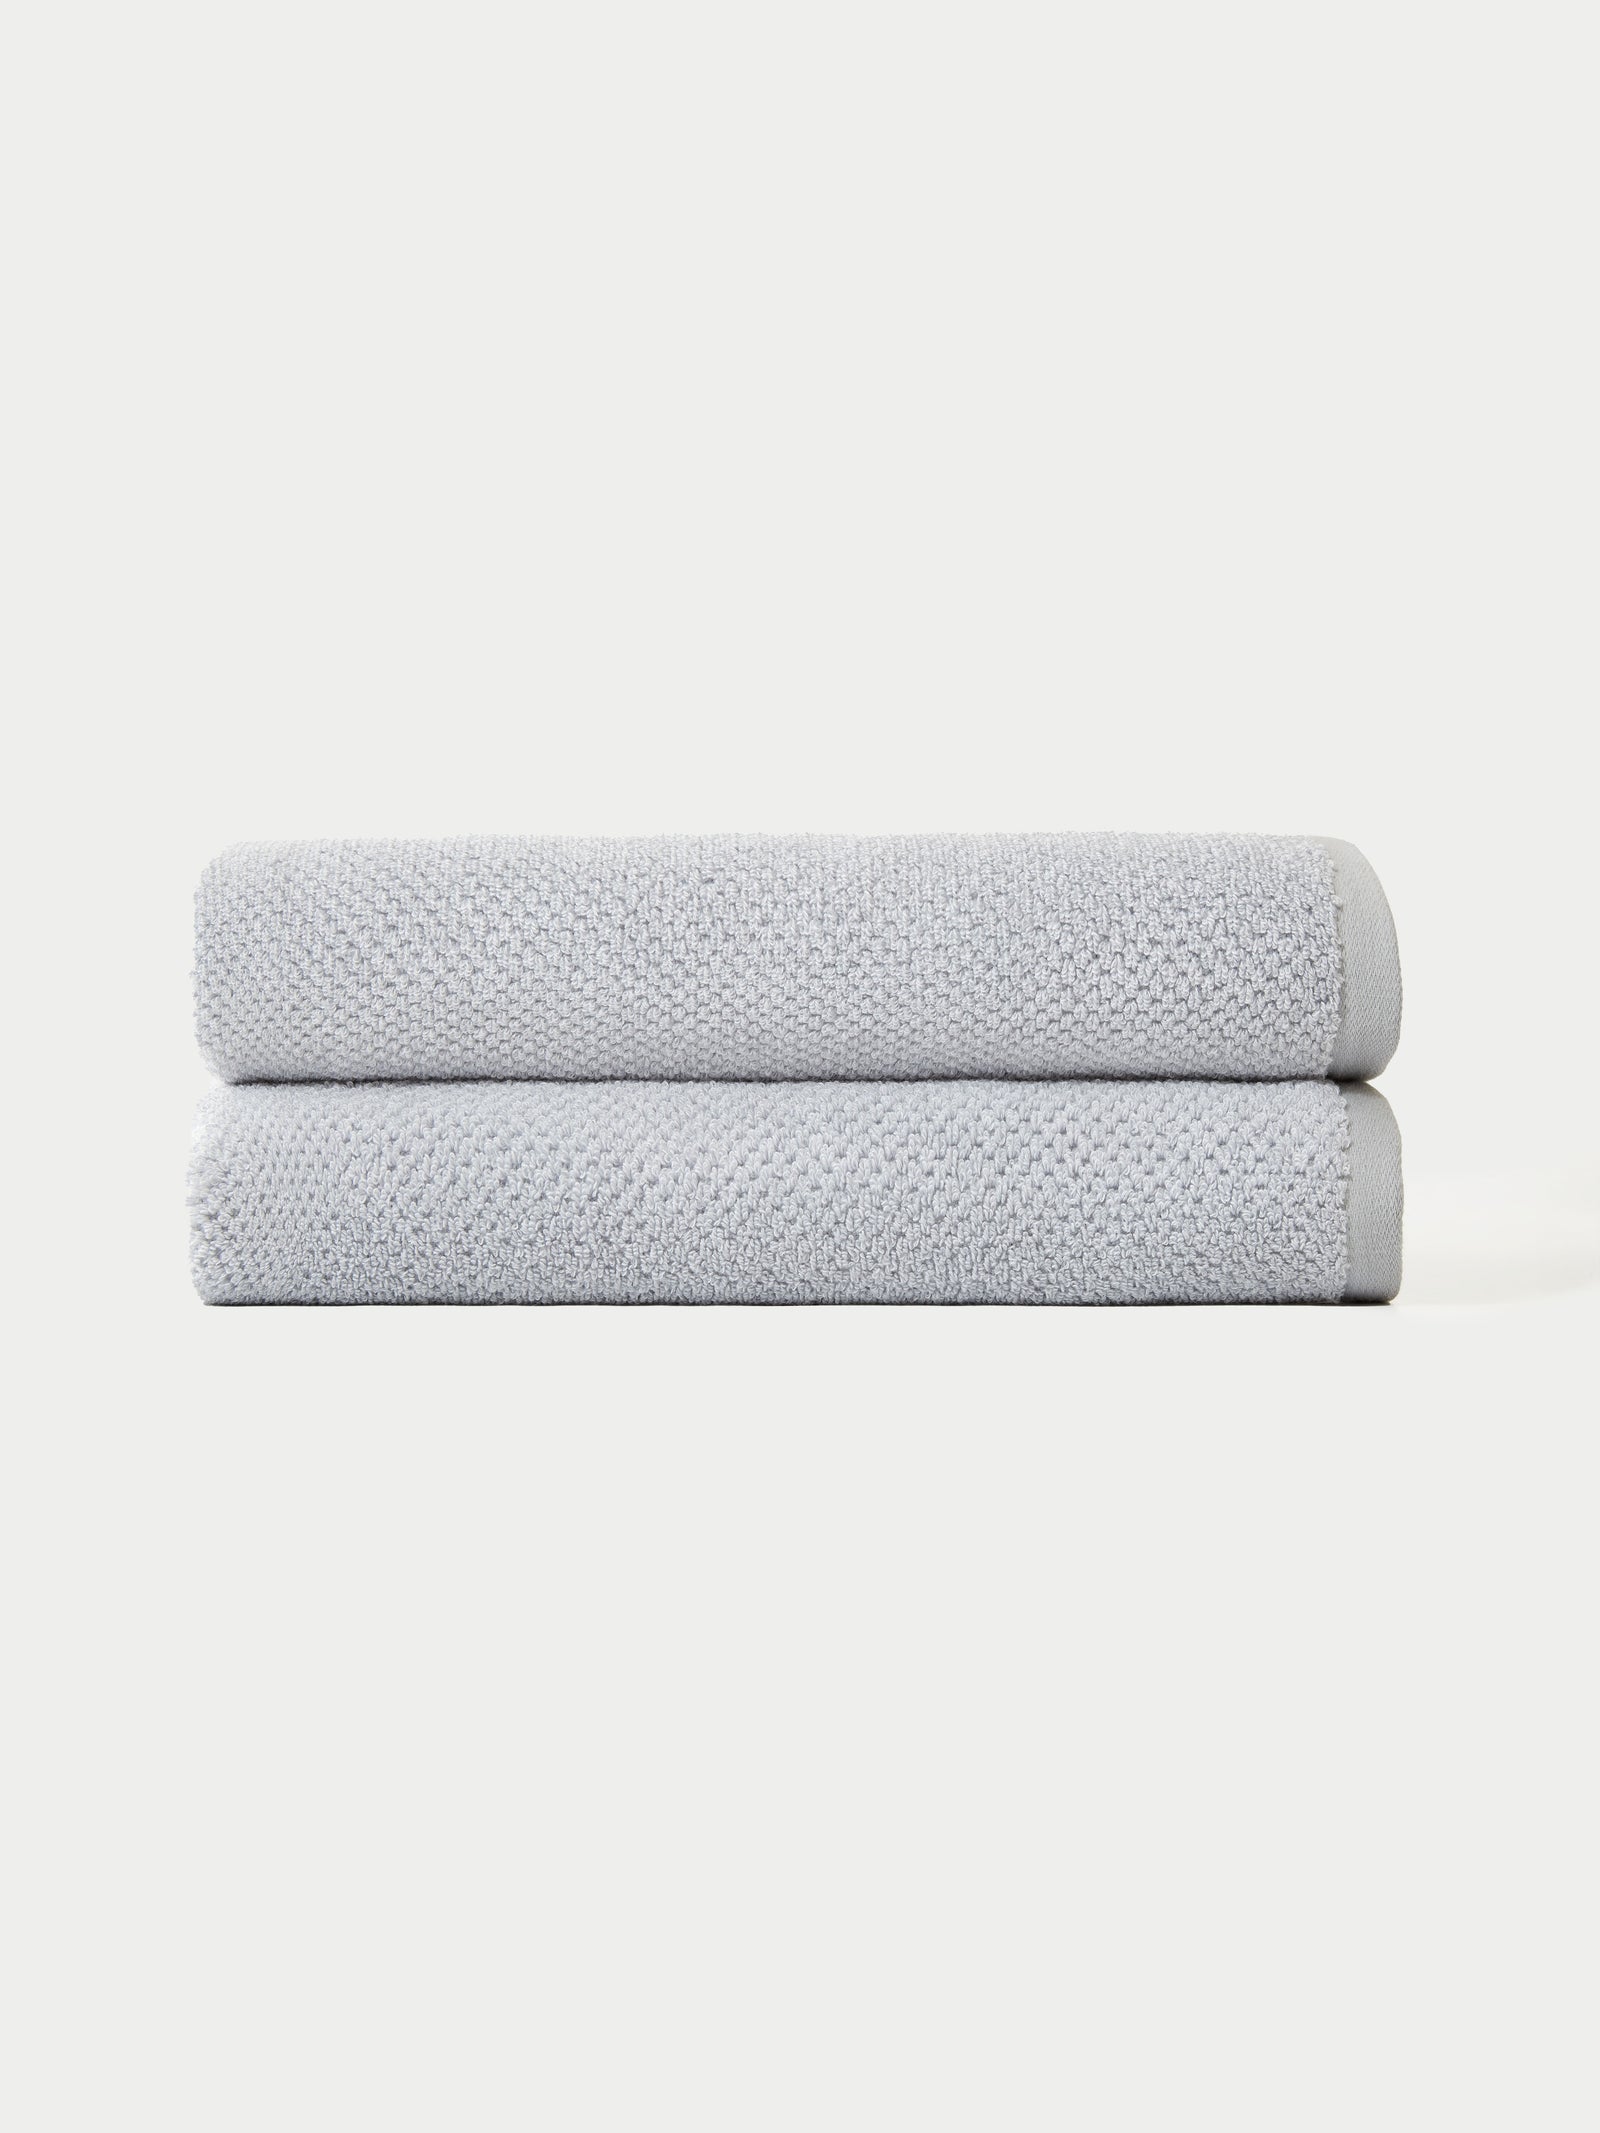 Nantucket Bath Sheets in the color Heathered Harbor Mist. The bath sheets are neatly folded. The photo of the bath sheets was taken with a white background.